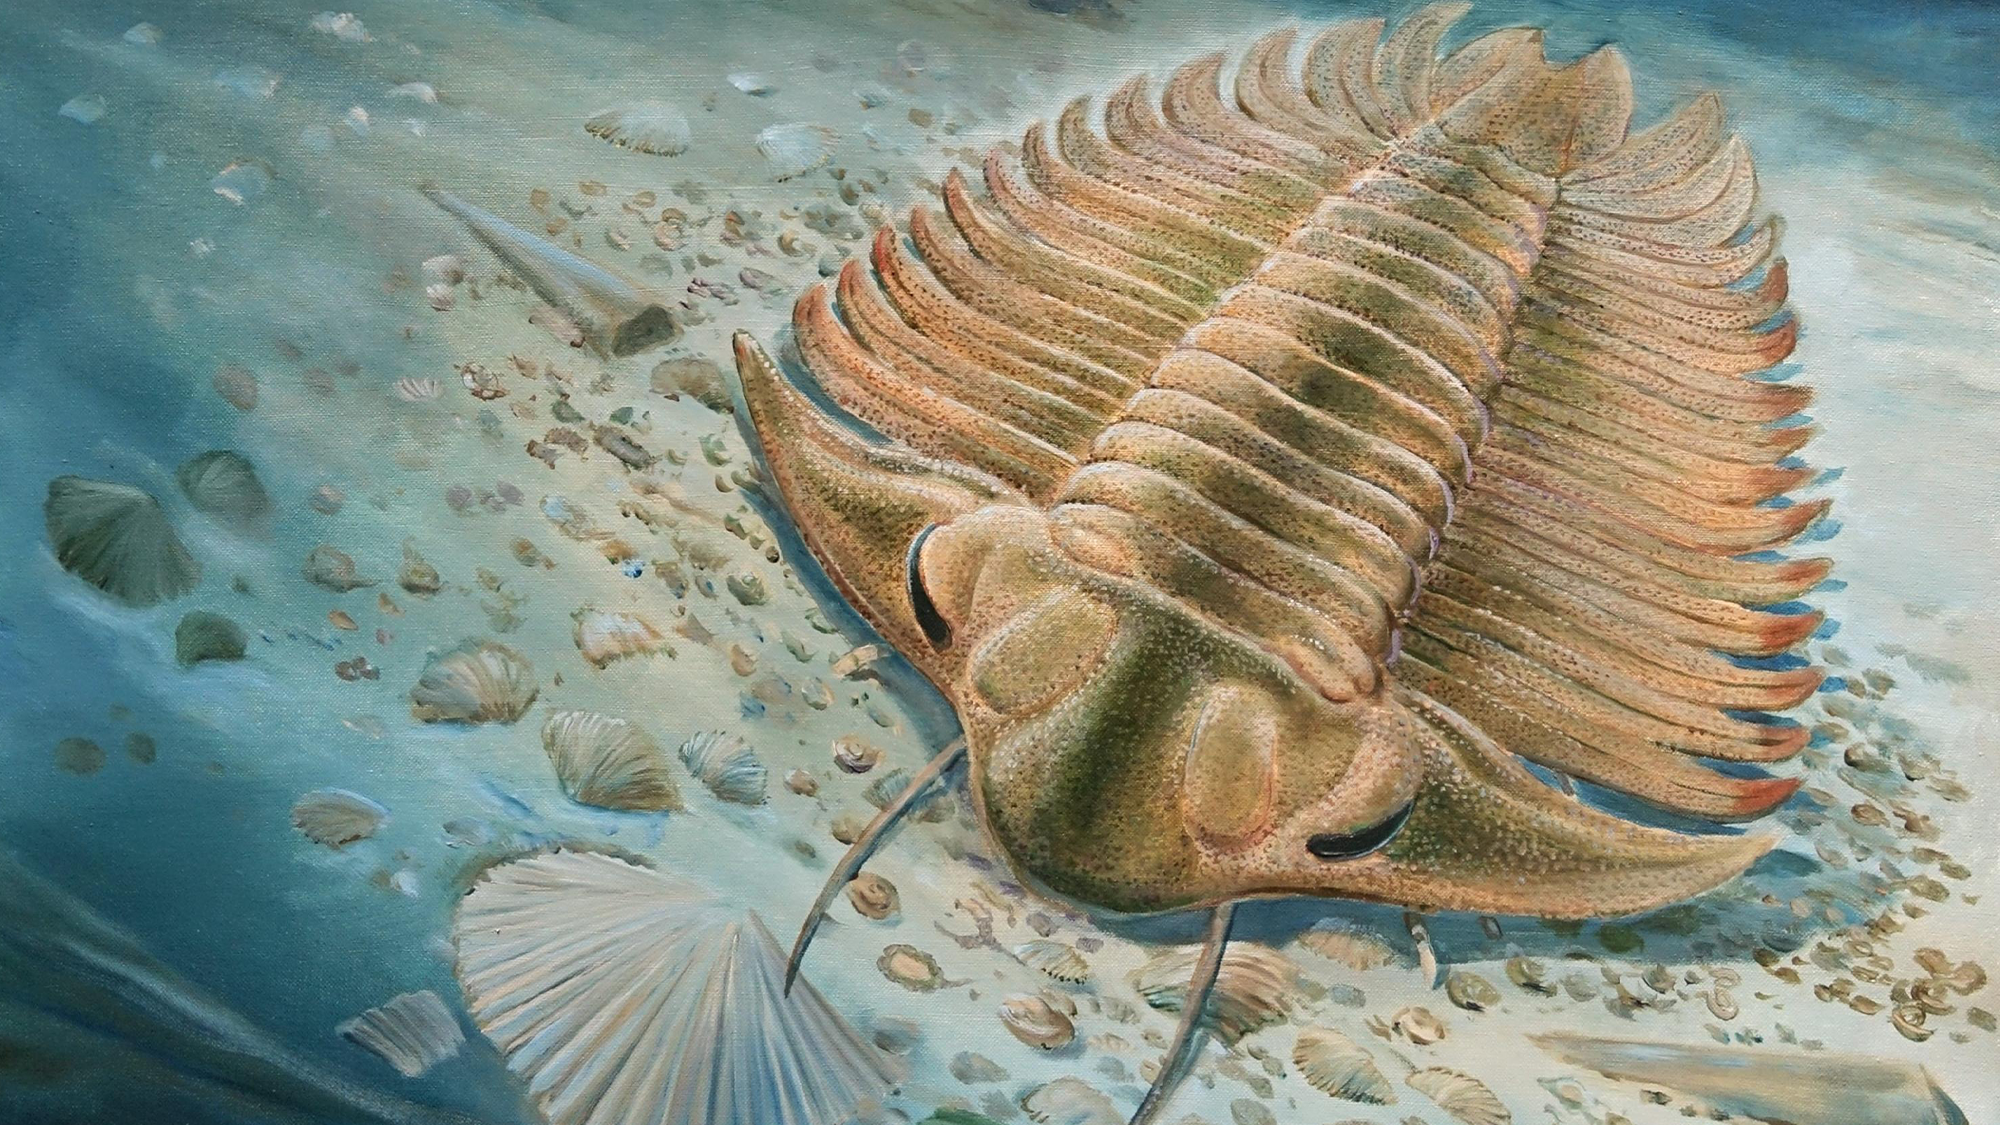 An illustration of Bohemolichas feeding on the seafloor, moments before it is engulfed, buried, and preserved by an underwater mud flow.